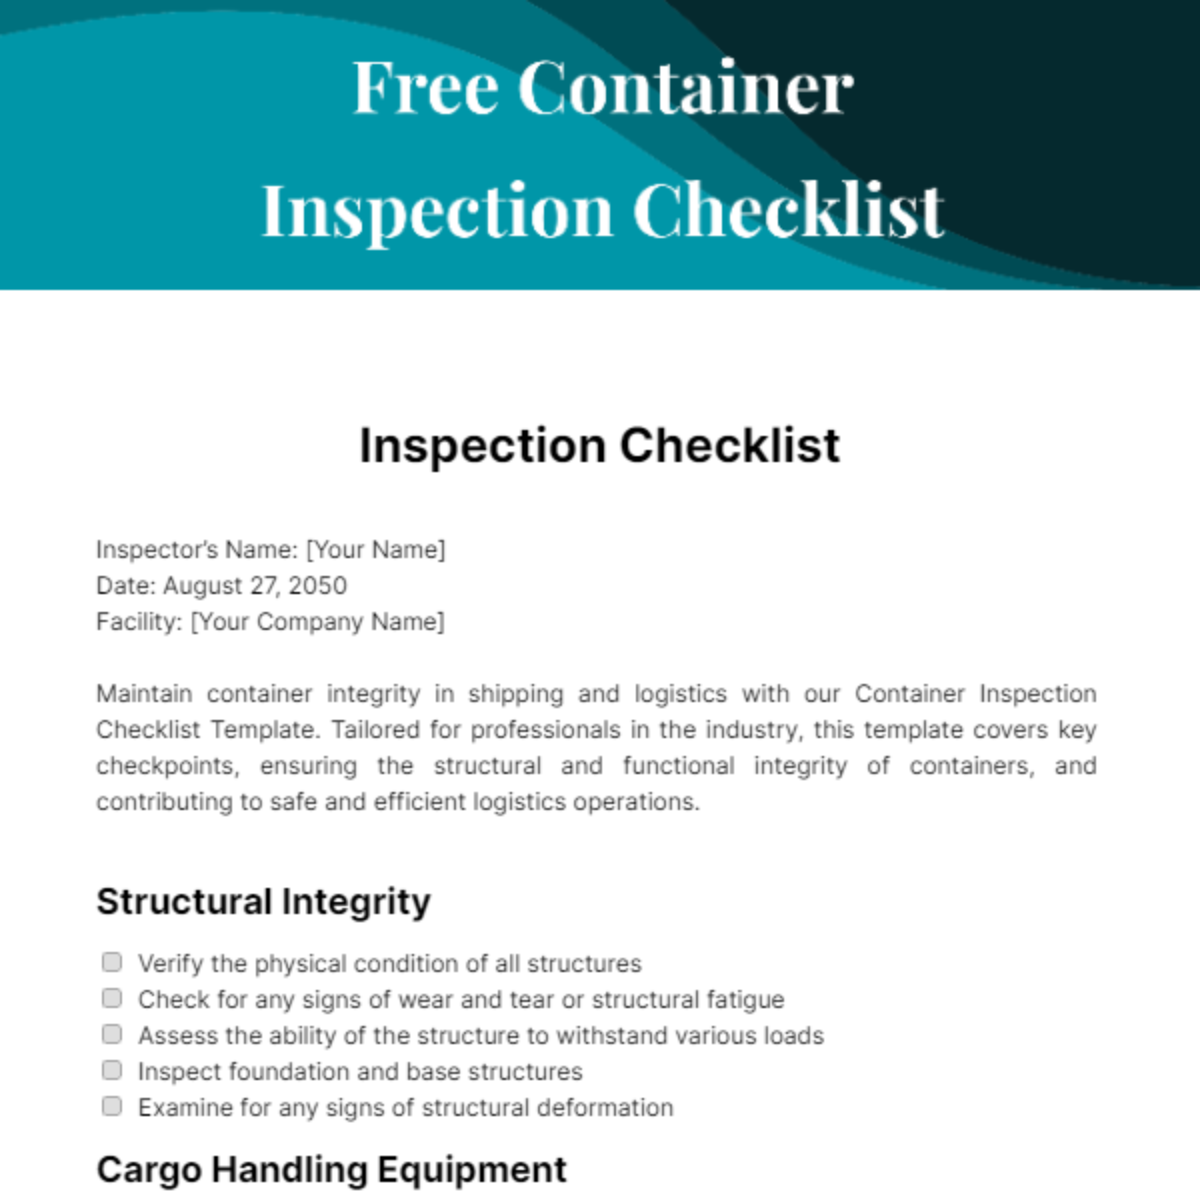 Free Container Inspection Checklist Template